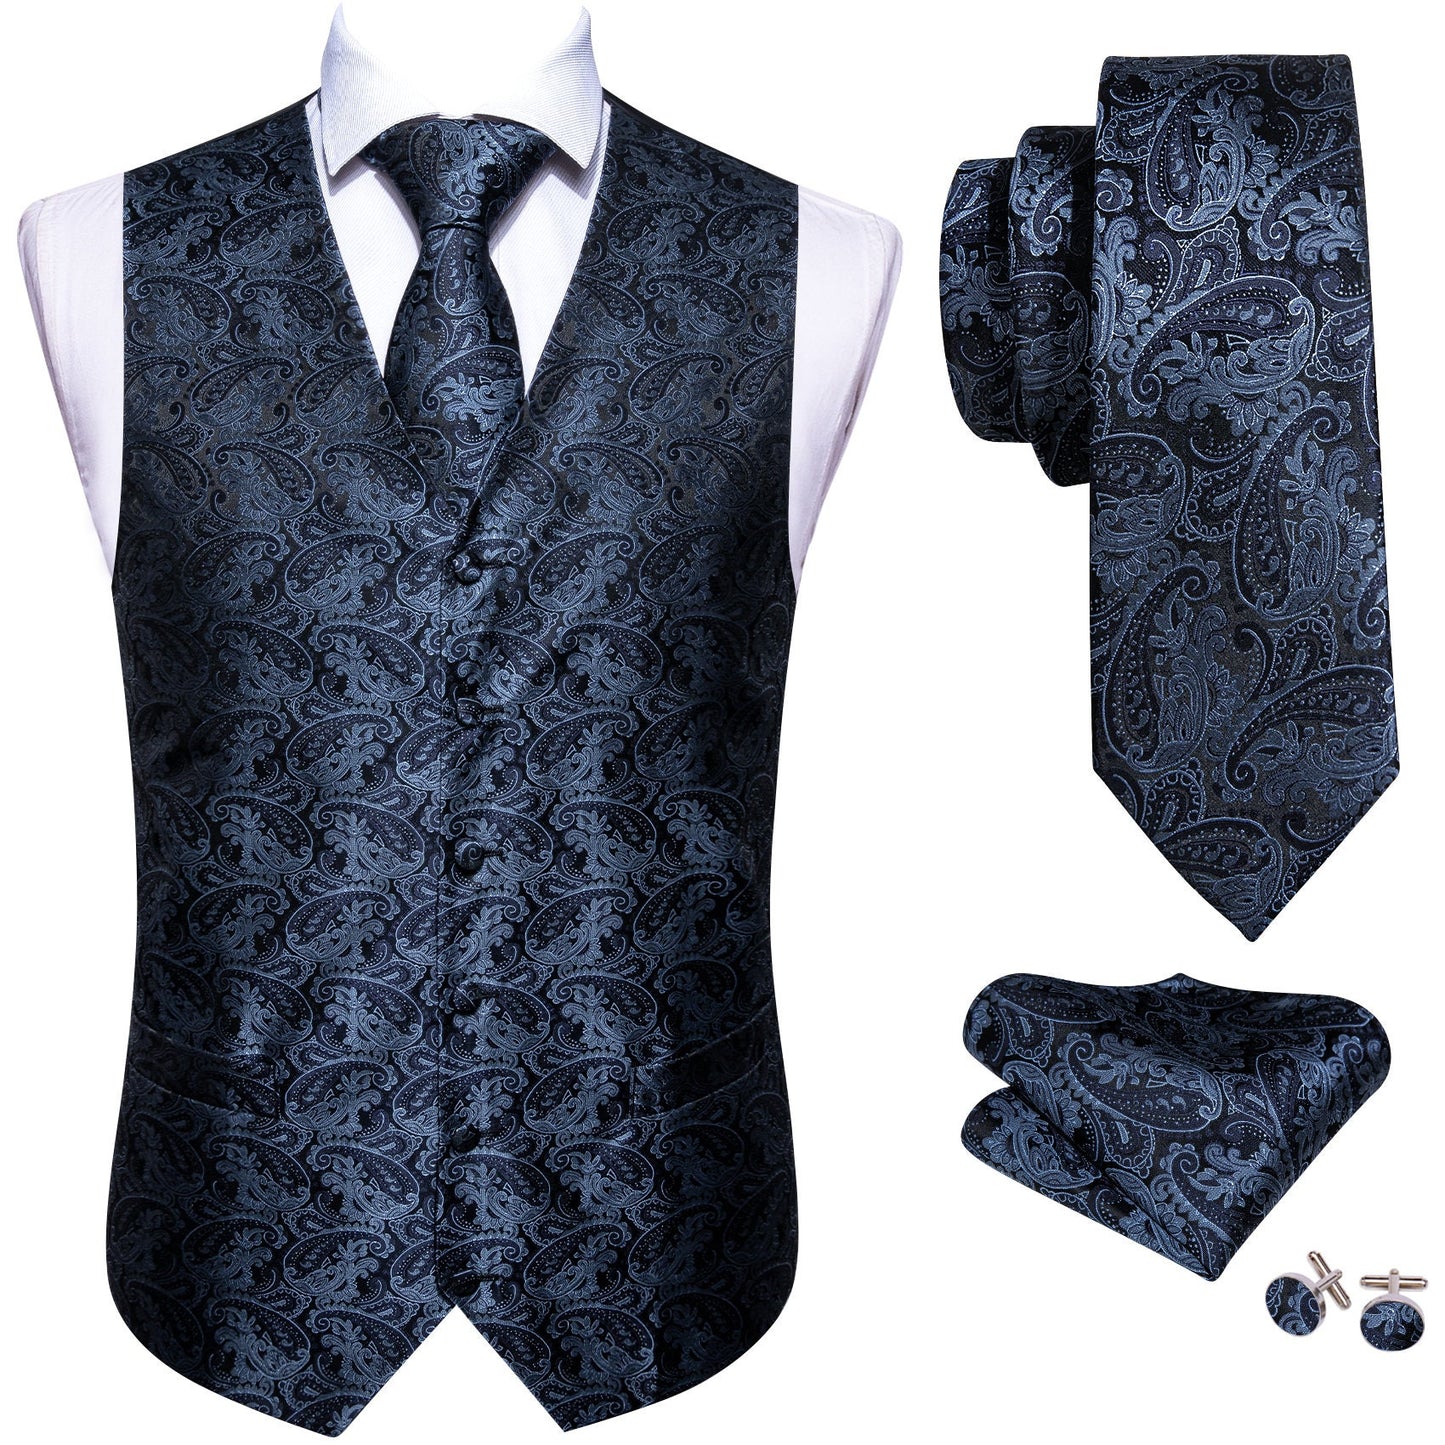 Barry Wang Blue Floral Paisley Waistcoat Men Paisley Tie hanky Set with Floral Pocket Square